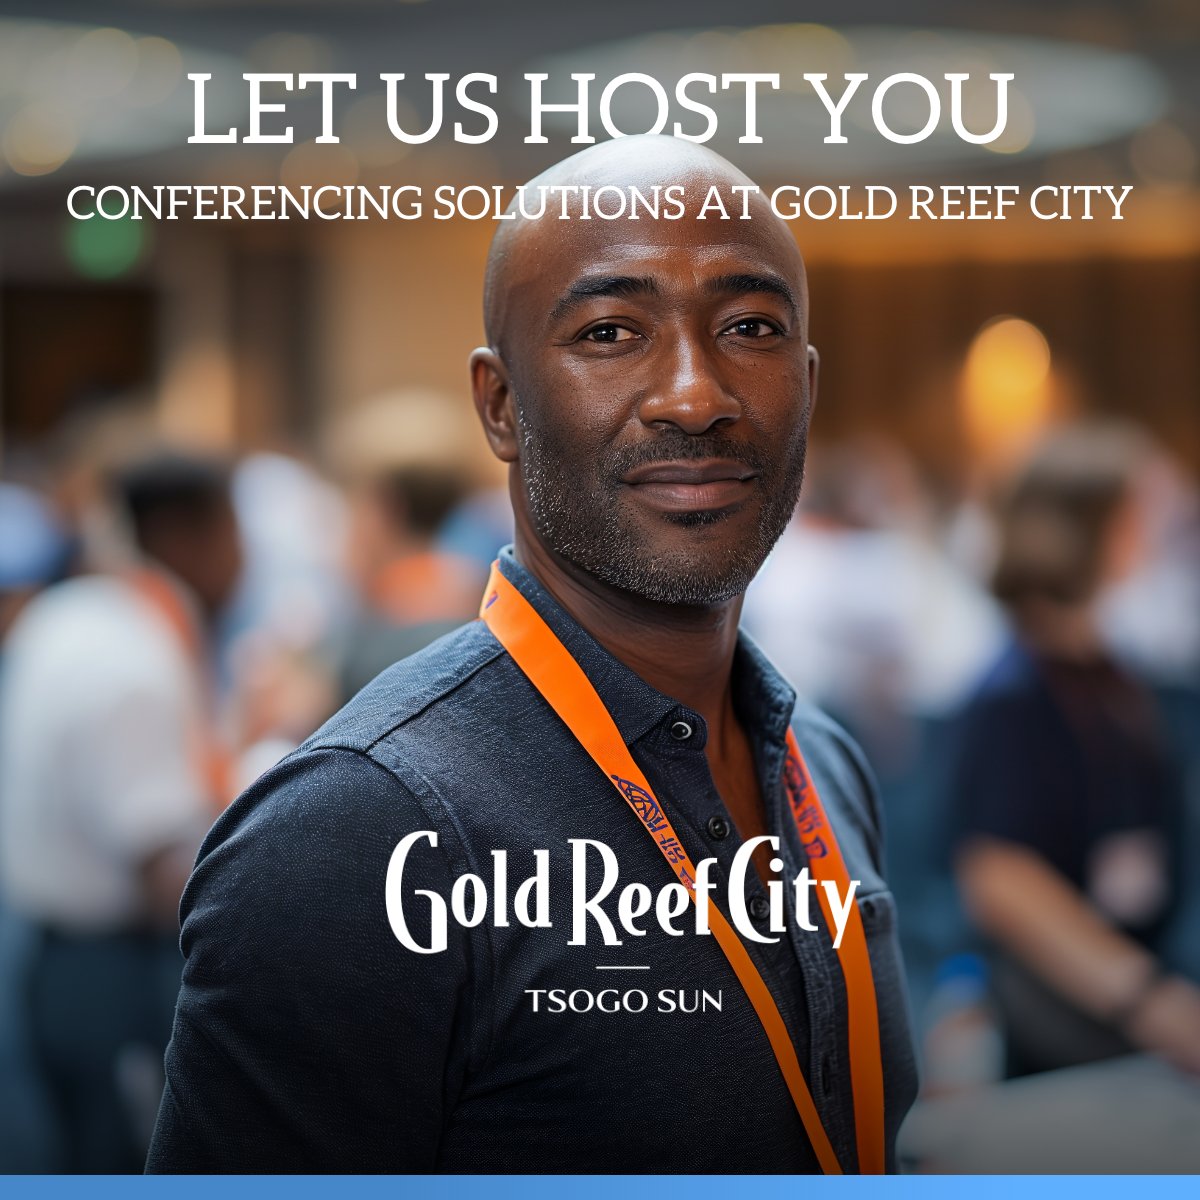 Need a space to launch your product, business, graduation, or conference & have fun while doing it? Look no further than Gold Reef City. We have flexible spaces that can host small to large groups. Whatever your needs, we have it - enquire today. bit.ly/3UlJmOh